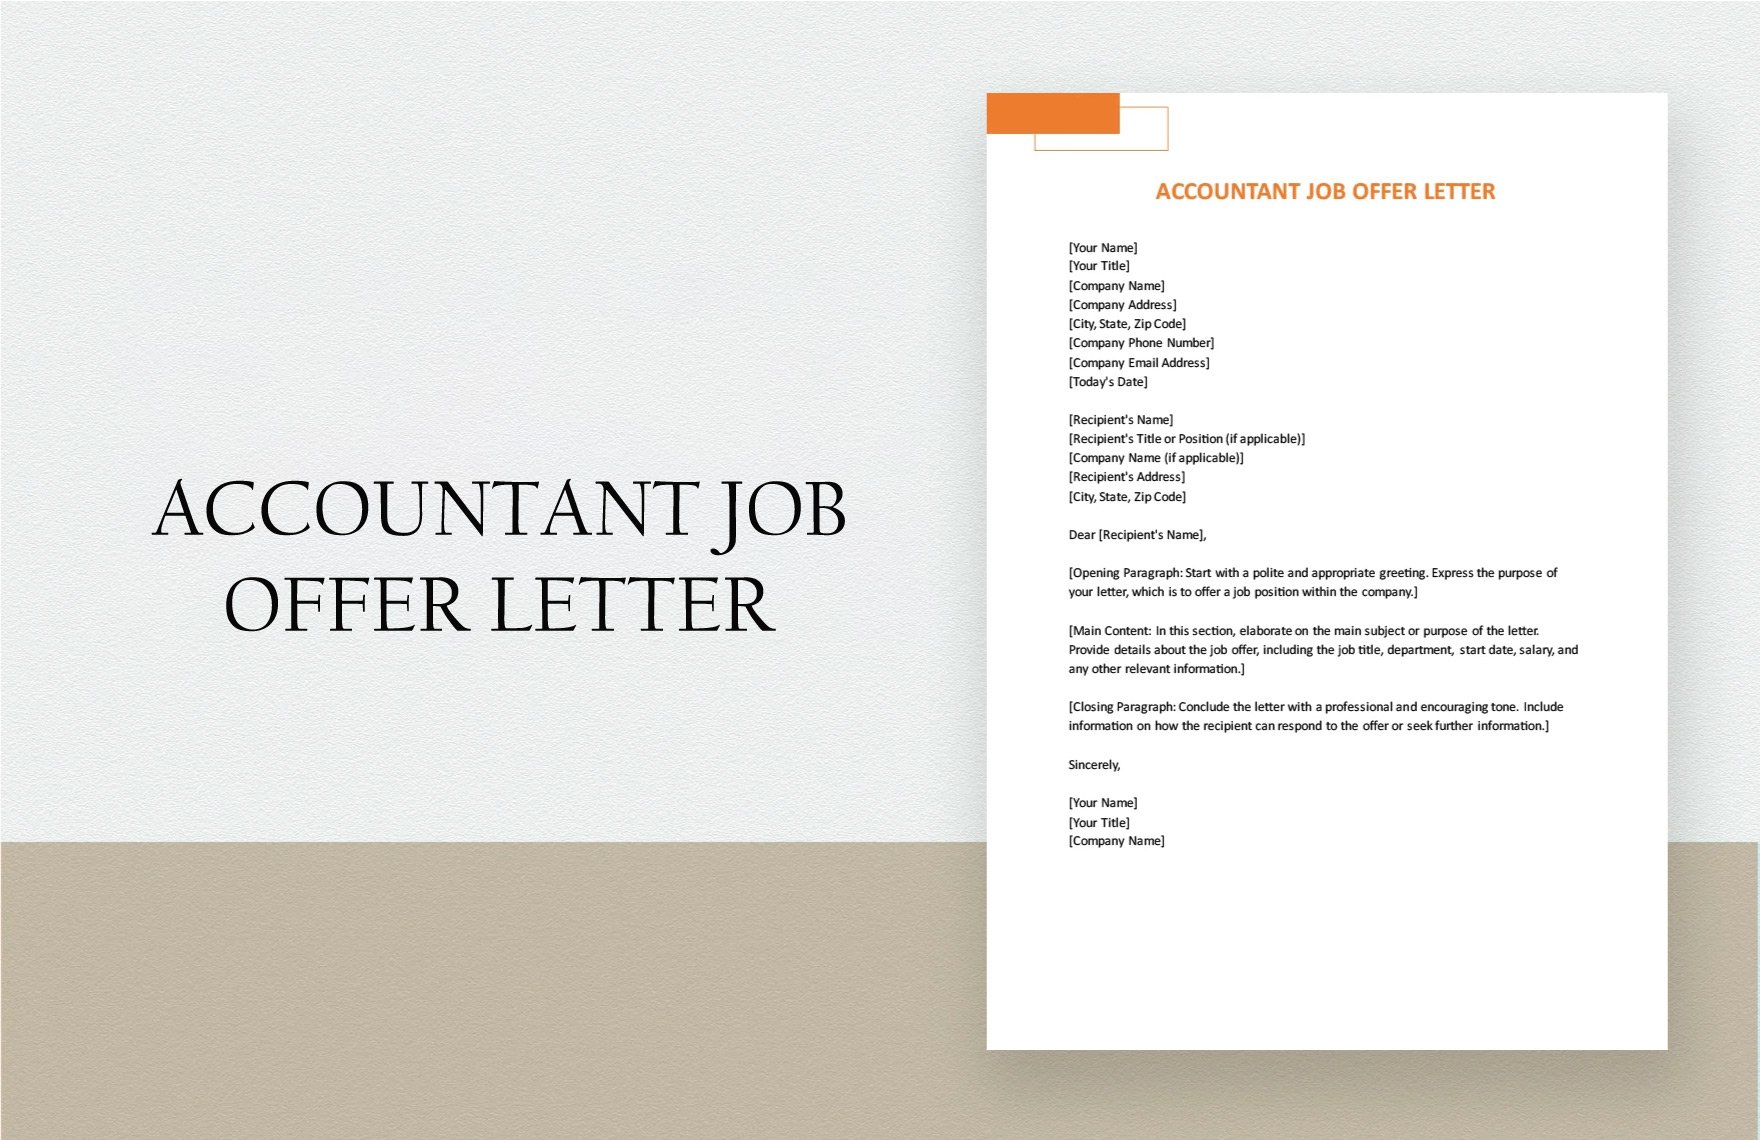 Accountant Job Offer Letter in Word, Google Docs, PDF